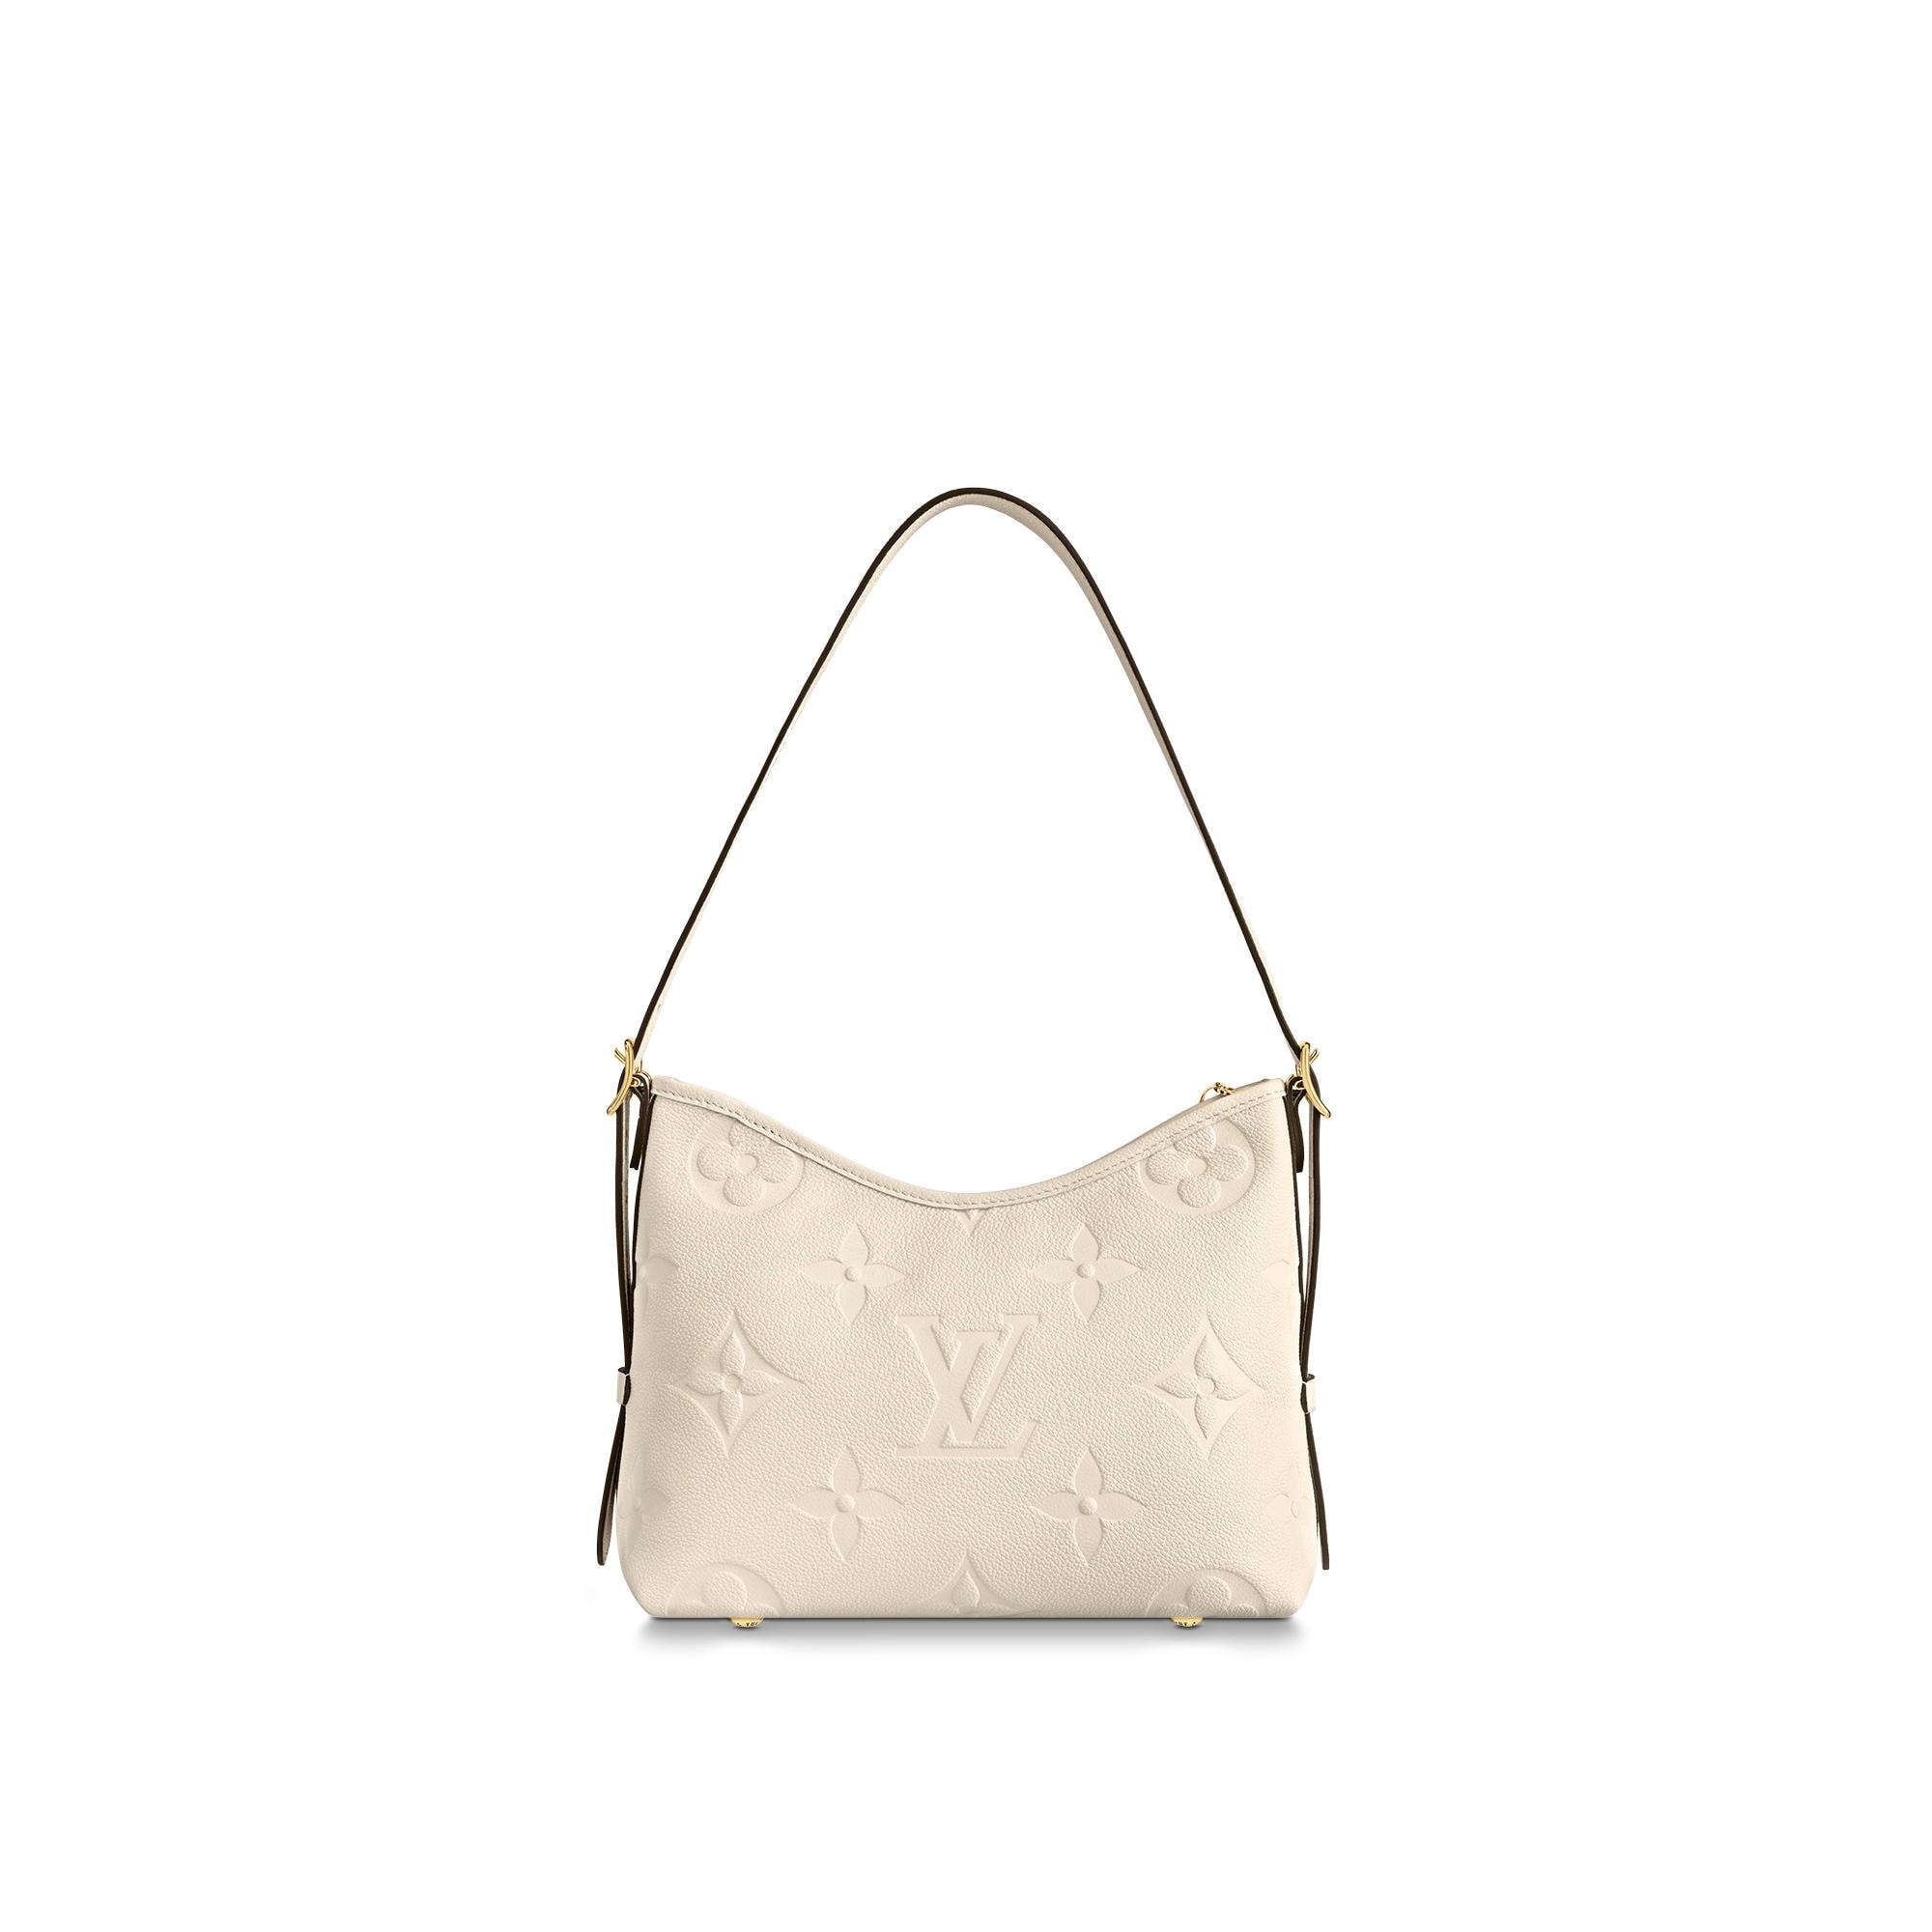 Louis Vuitton Carryall PM Bag, Beige, One Size